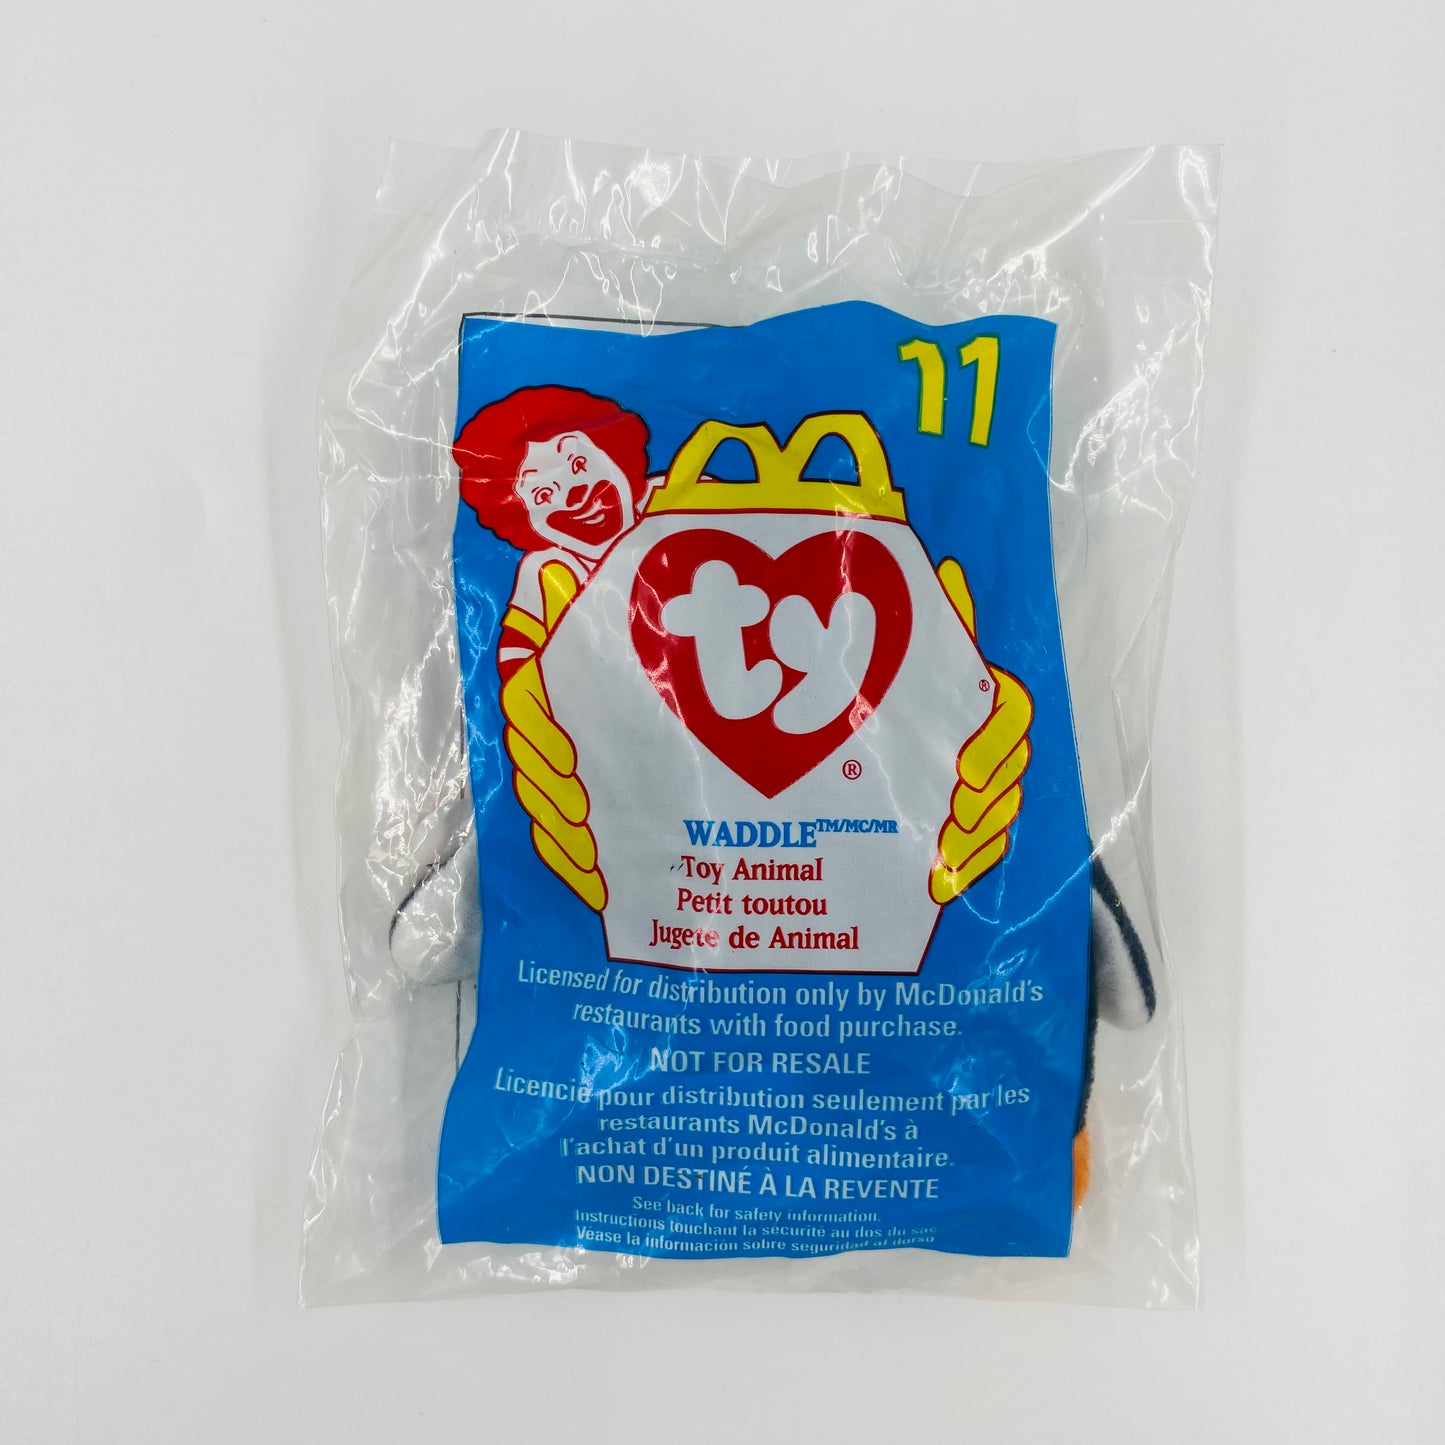 Teenie Beanie Babies Waddle the Penguin McDonald's Happy Meal bean bag plush toy animal (1998) bagged